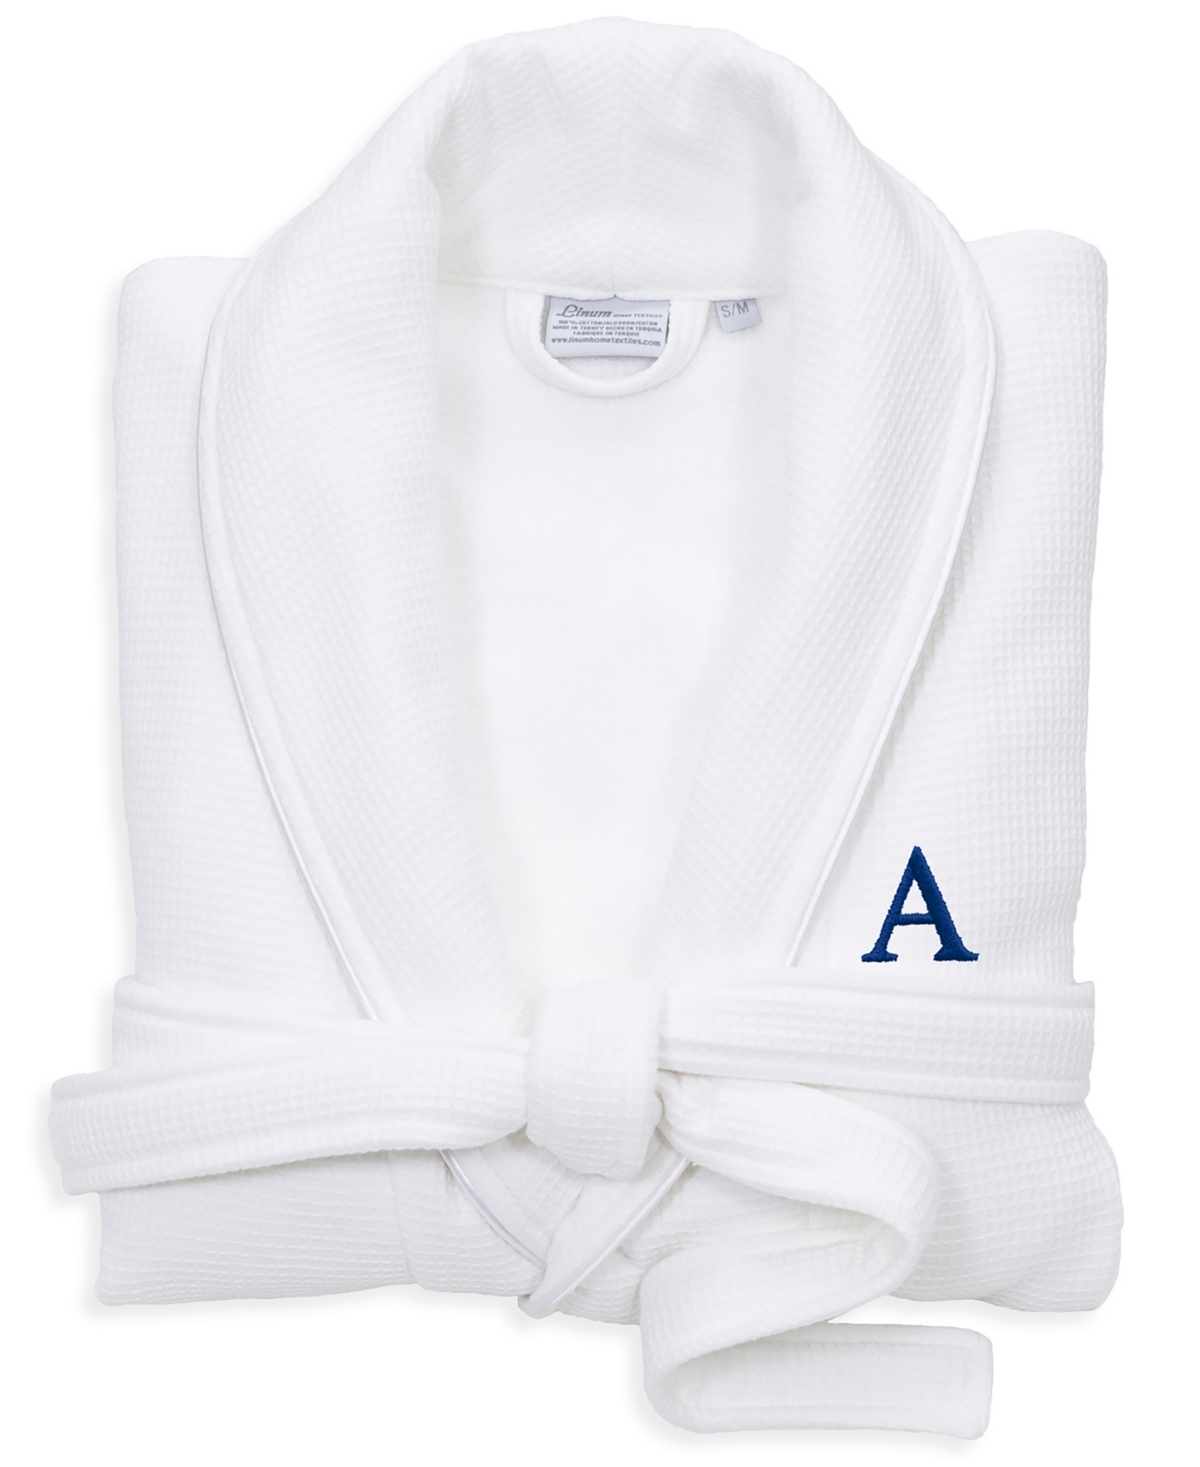 Linum Home Personalized 100% Turkish Cotton Waffle Terry Bathrobe with Satin Piped Trim - White Bedding